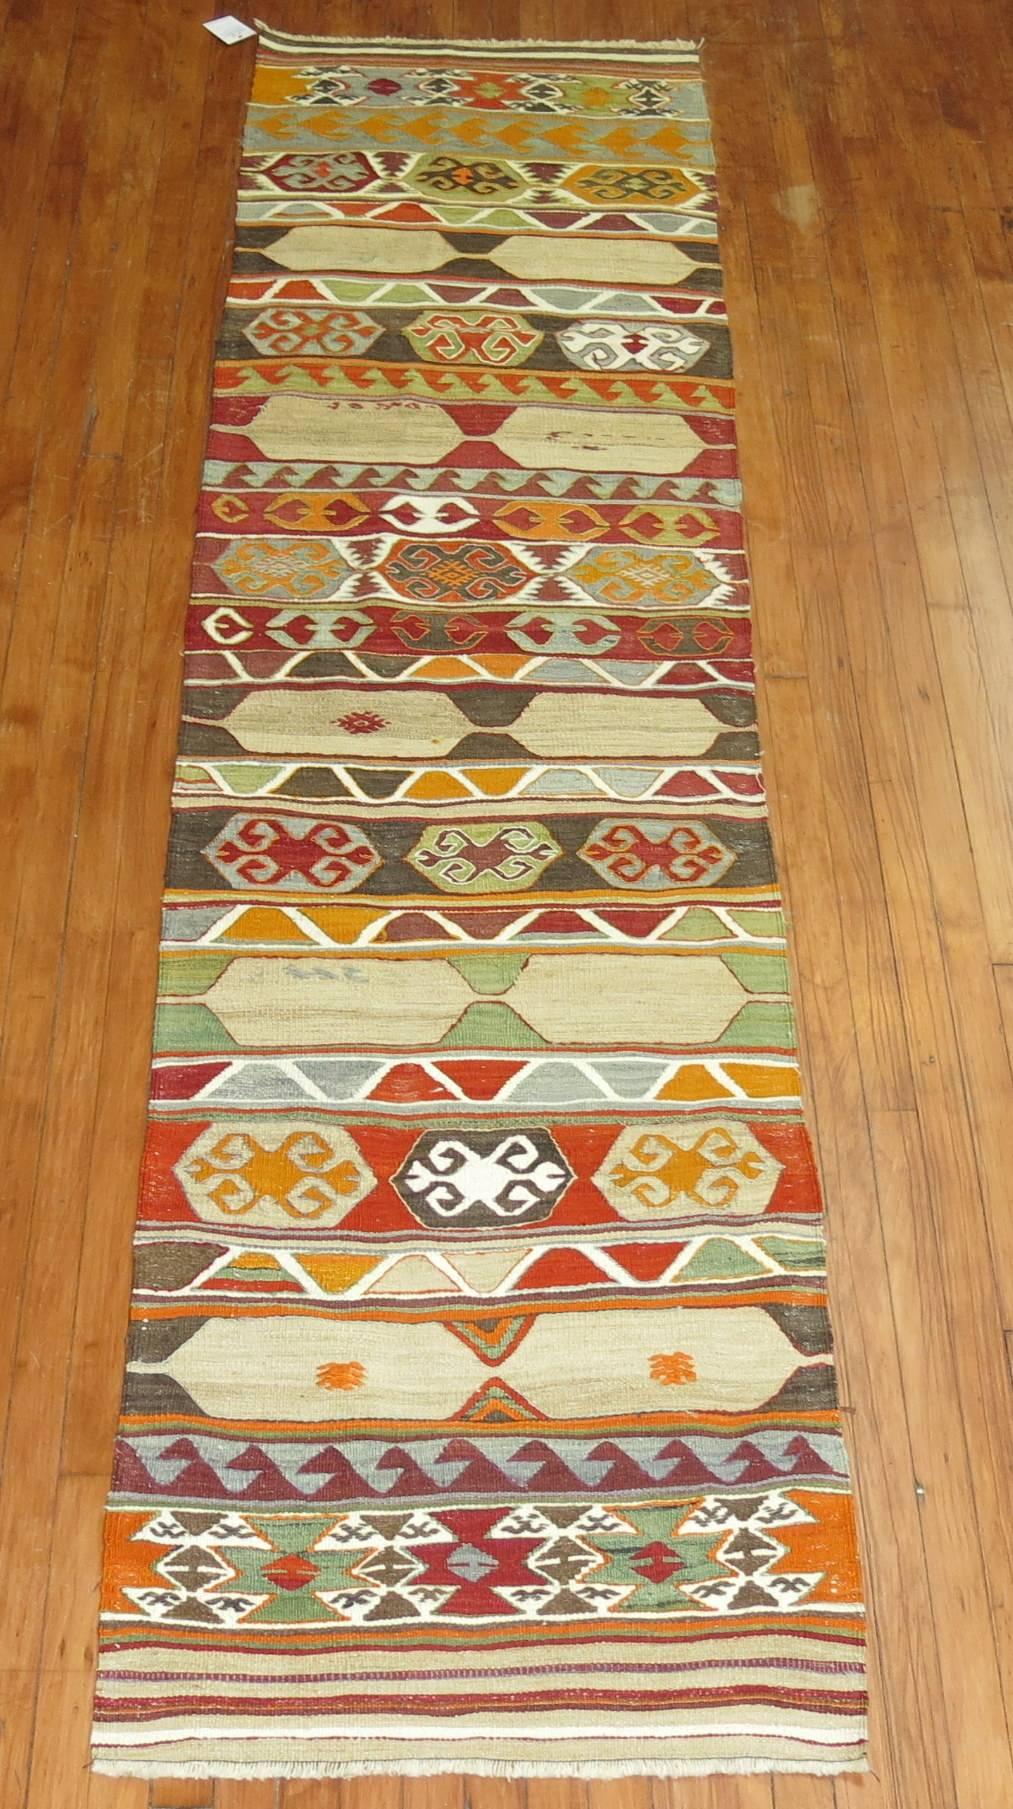 One of a kind, 100 % vegetable dyed authentic Vintage Turkish Kilim runner in bright colors.